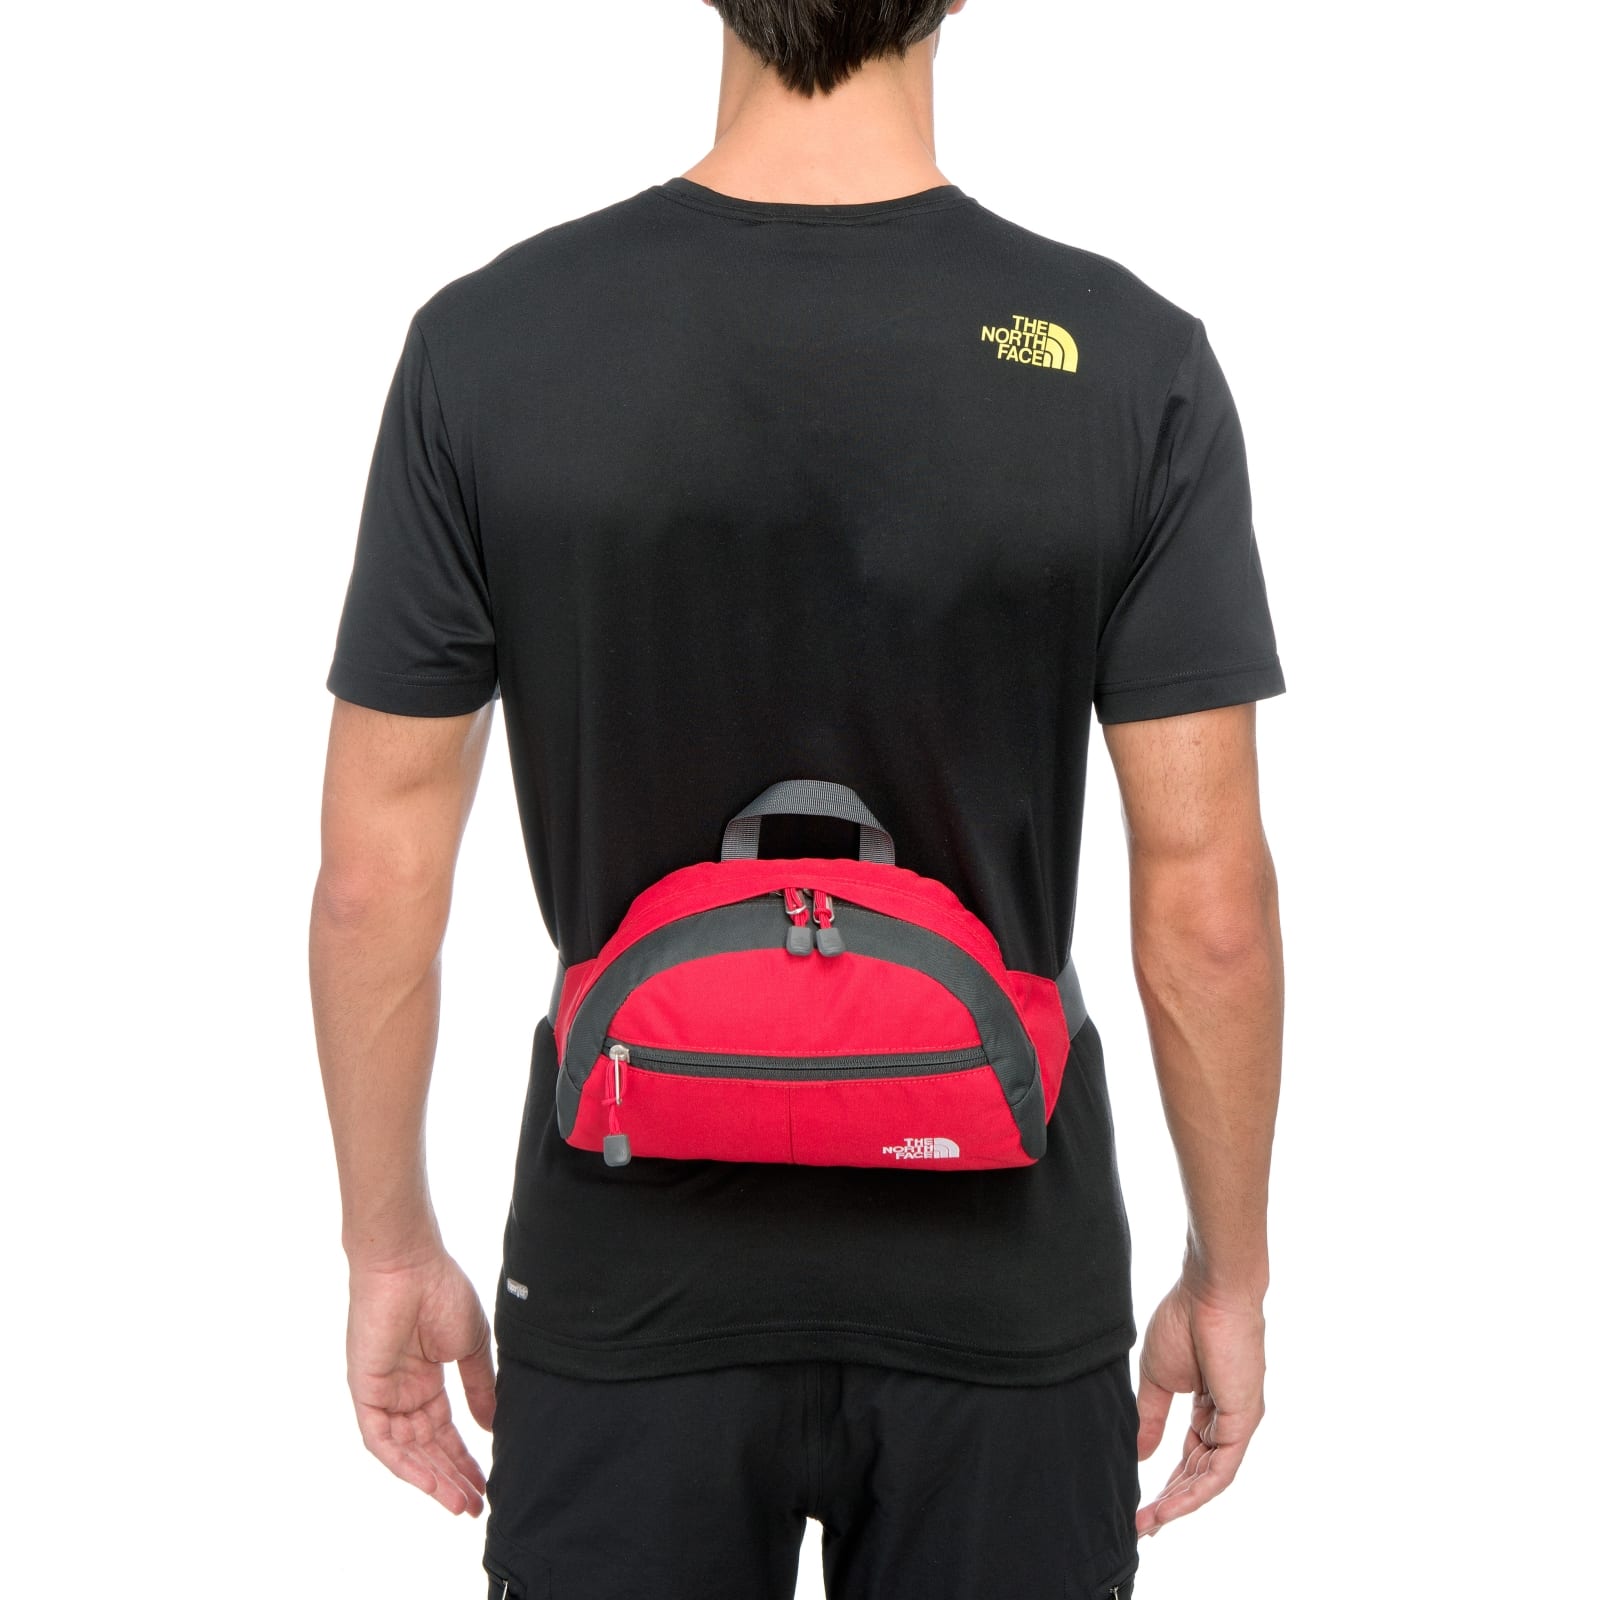 north face roo pack